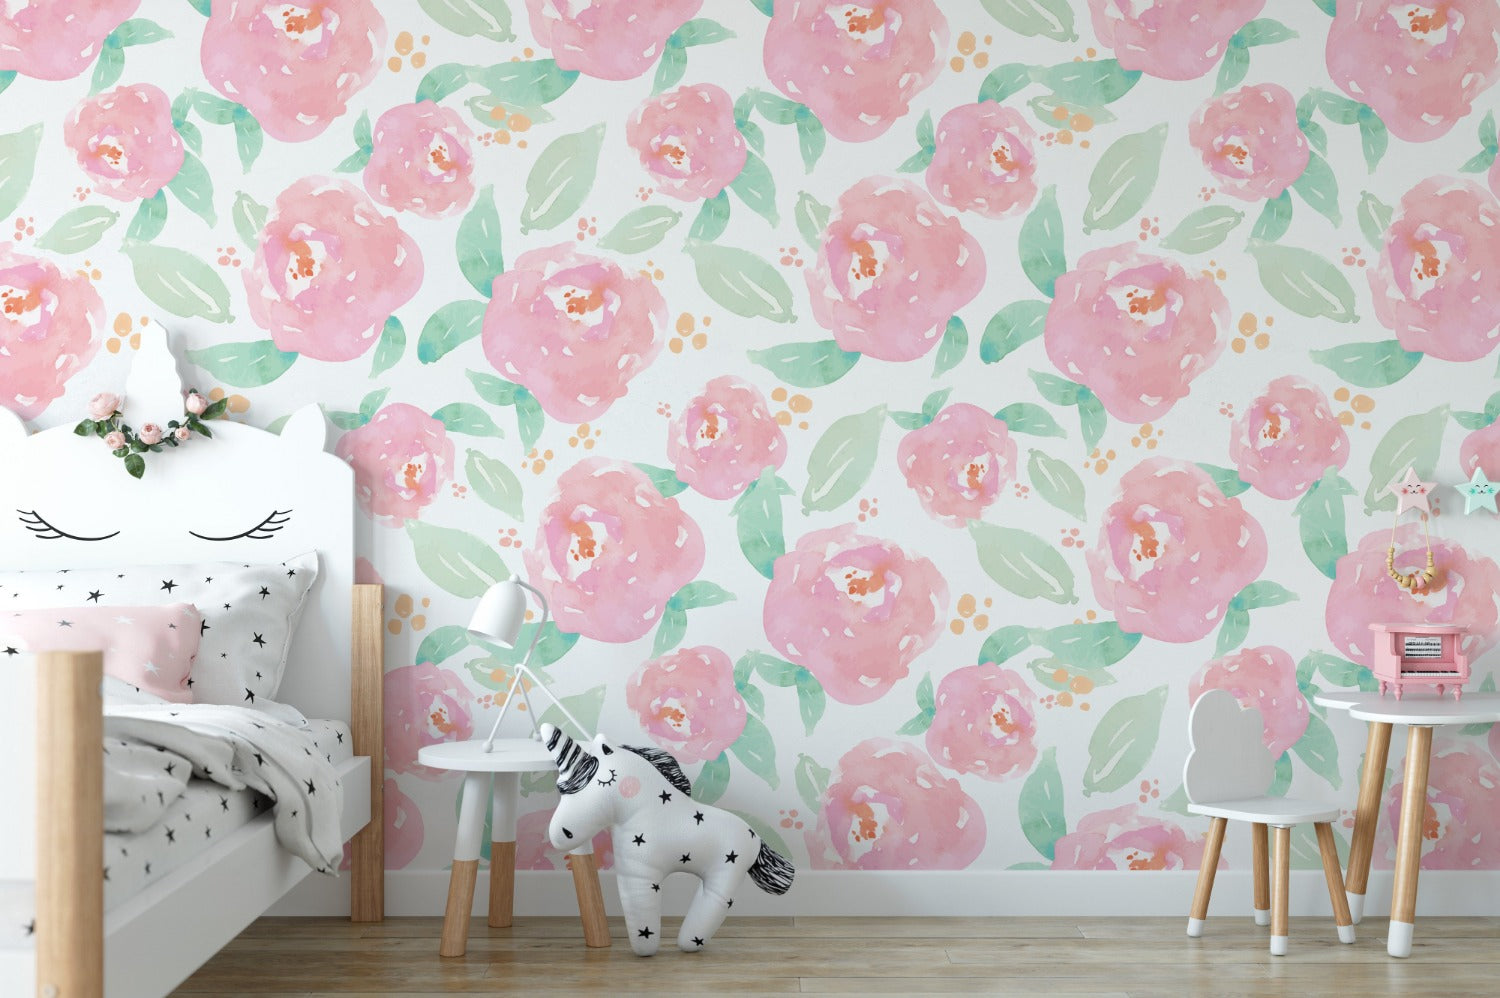 Nursery room decorated with bright nursery floral wallpaper featuring large pink peonies and green leaves